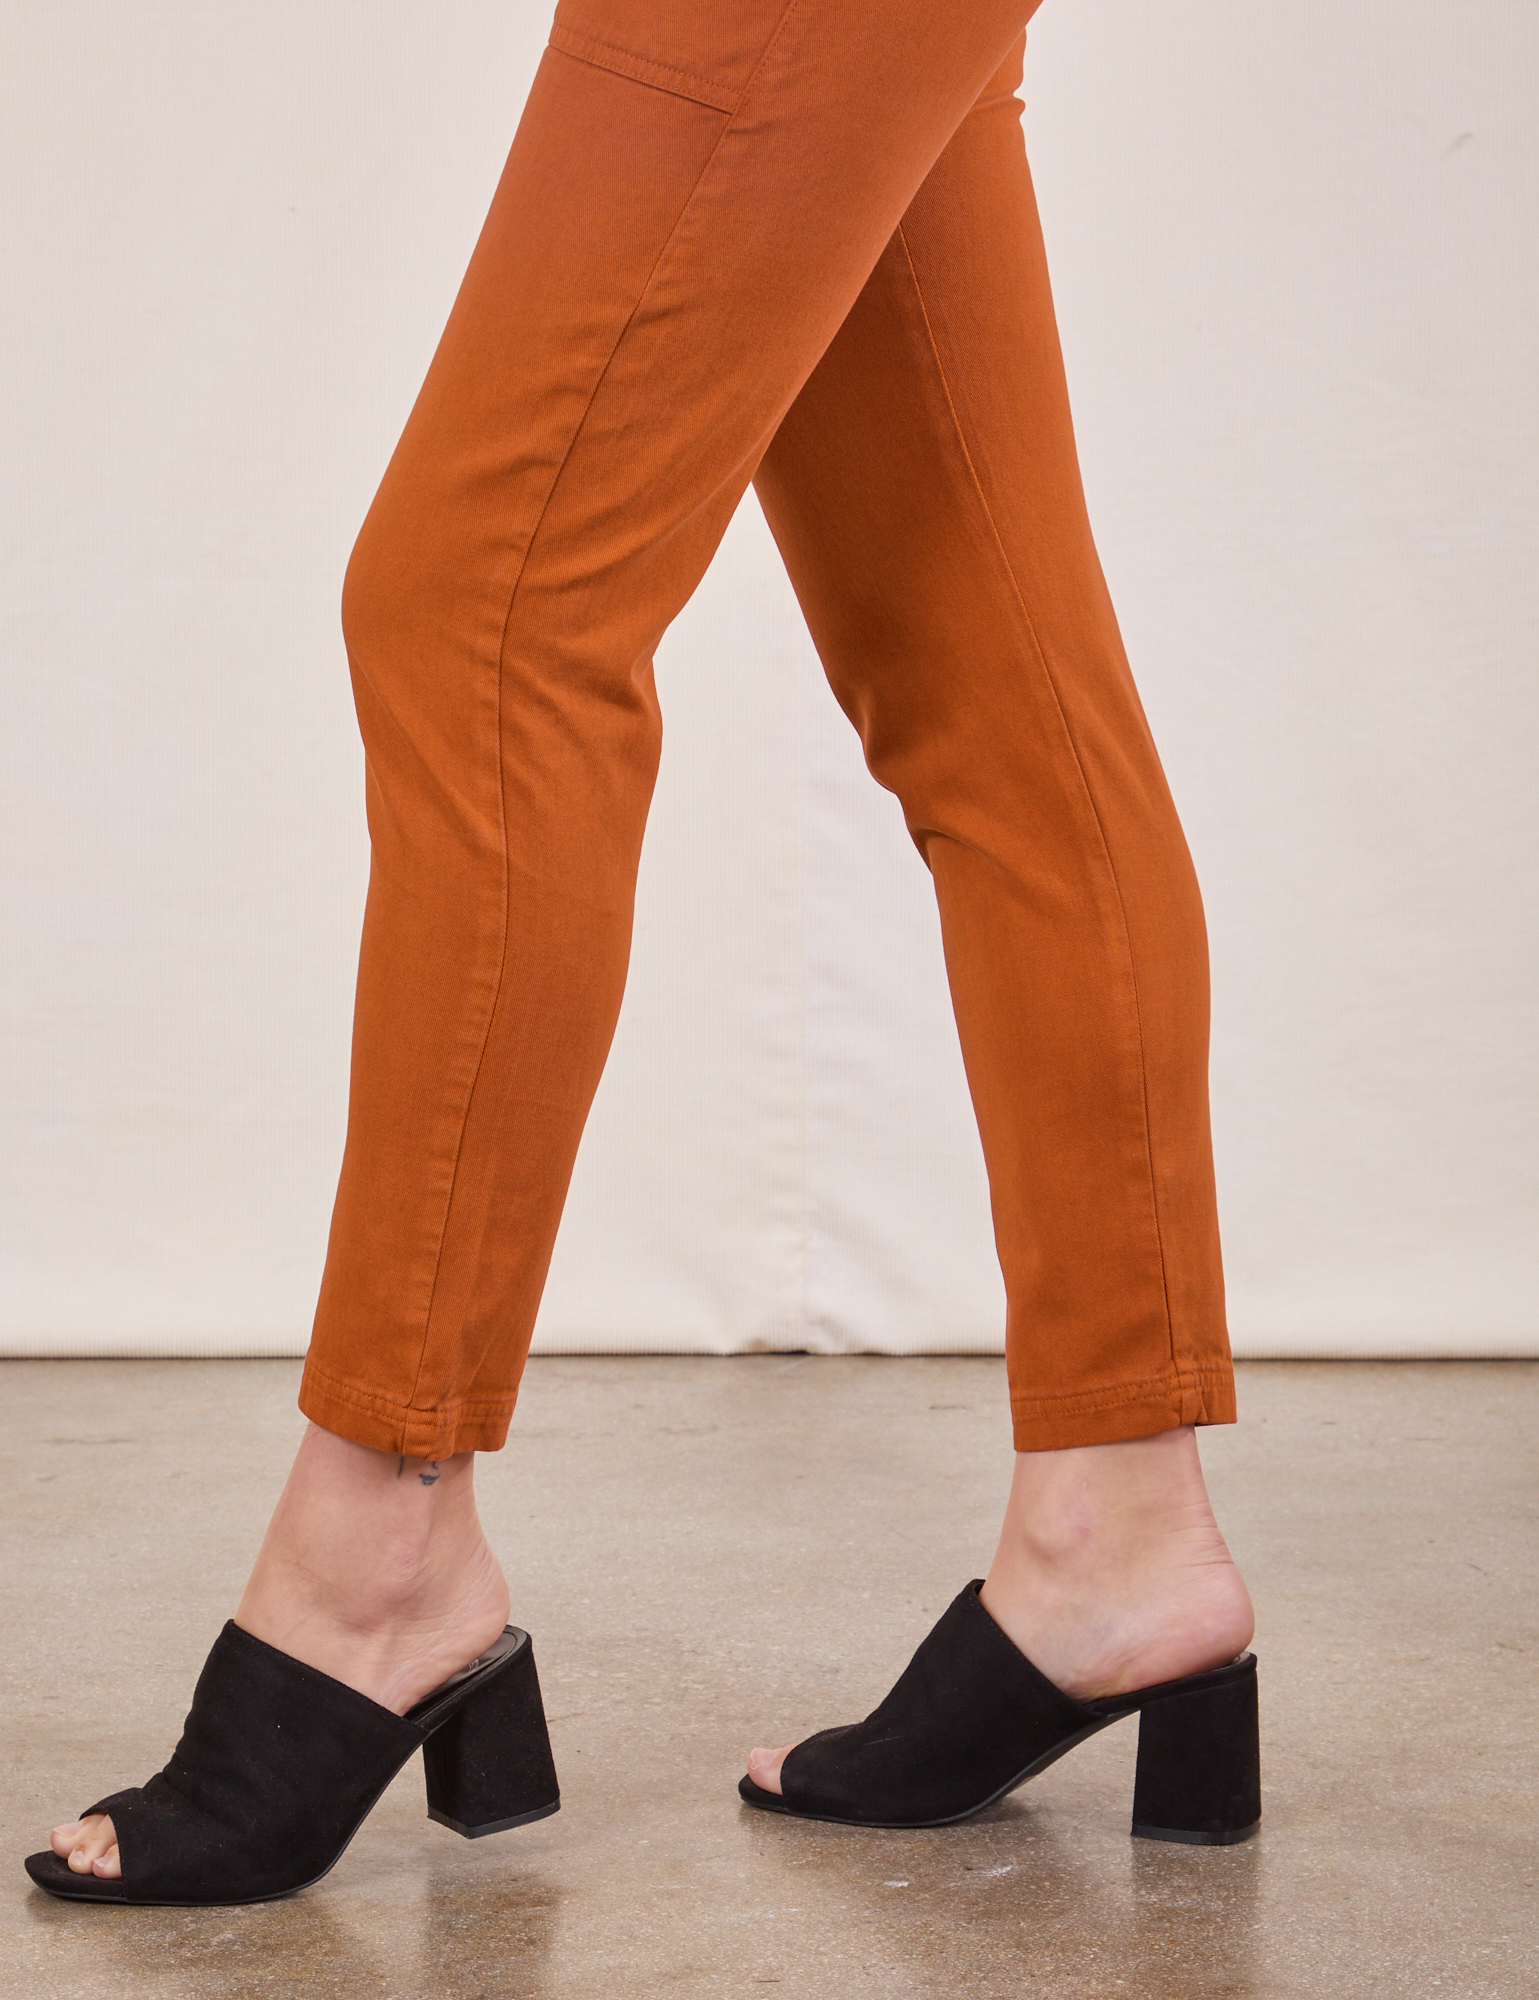 Pencil Pants in Burnt Terracotta pant leg side view close up on Alex